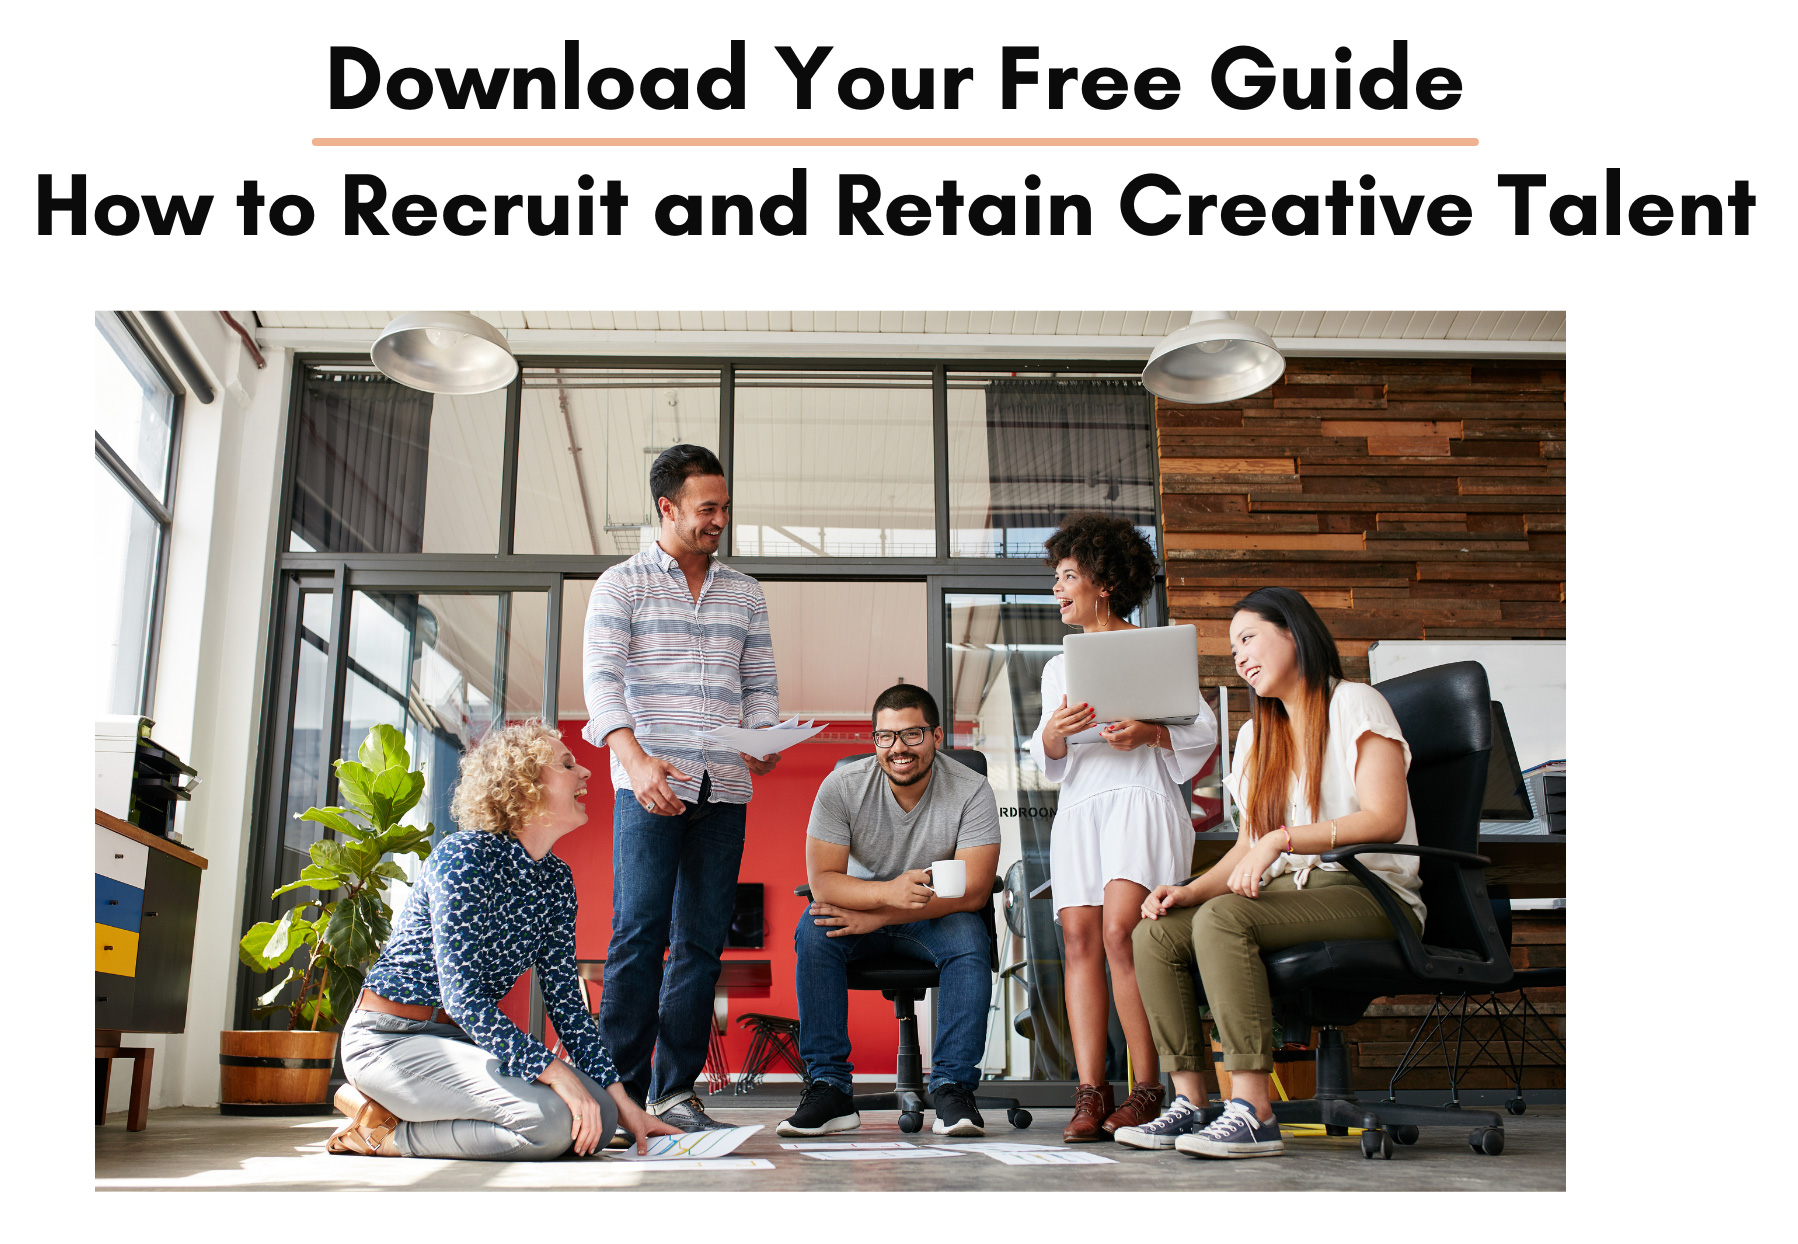 How to Recruit and Retain Creative Talent | Free Guide